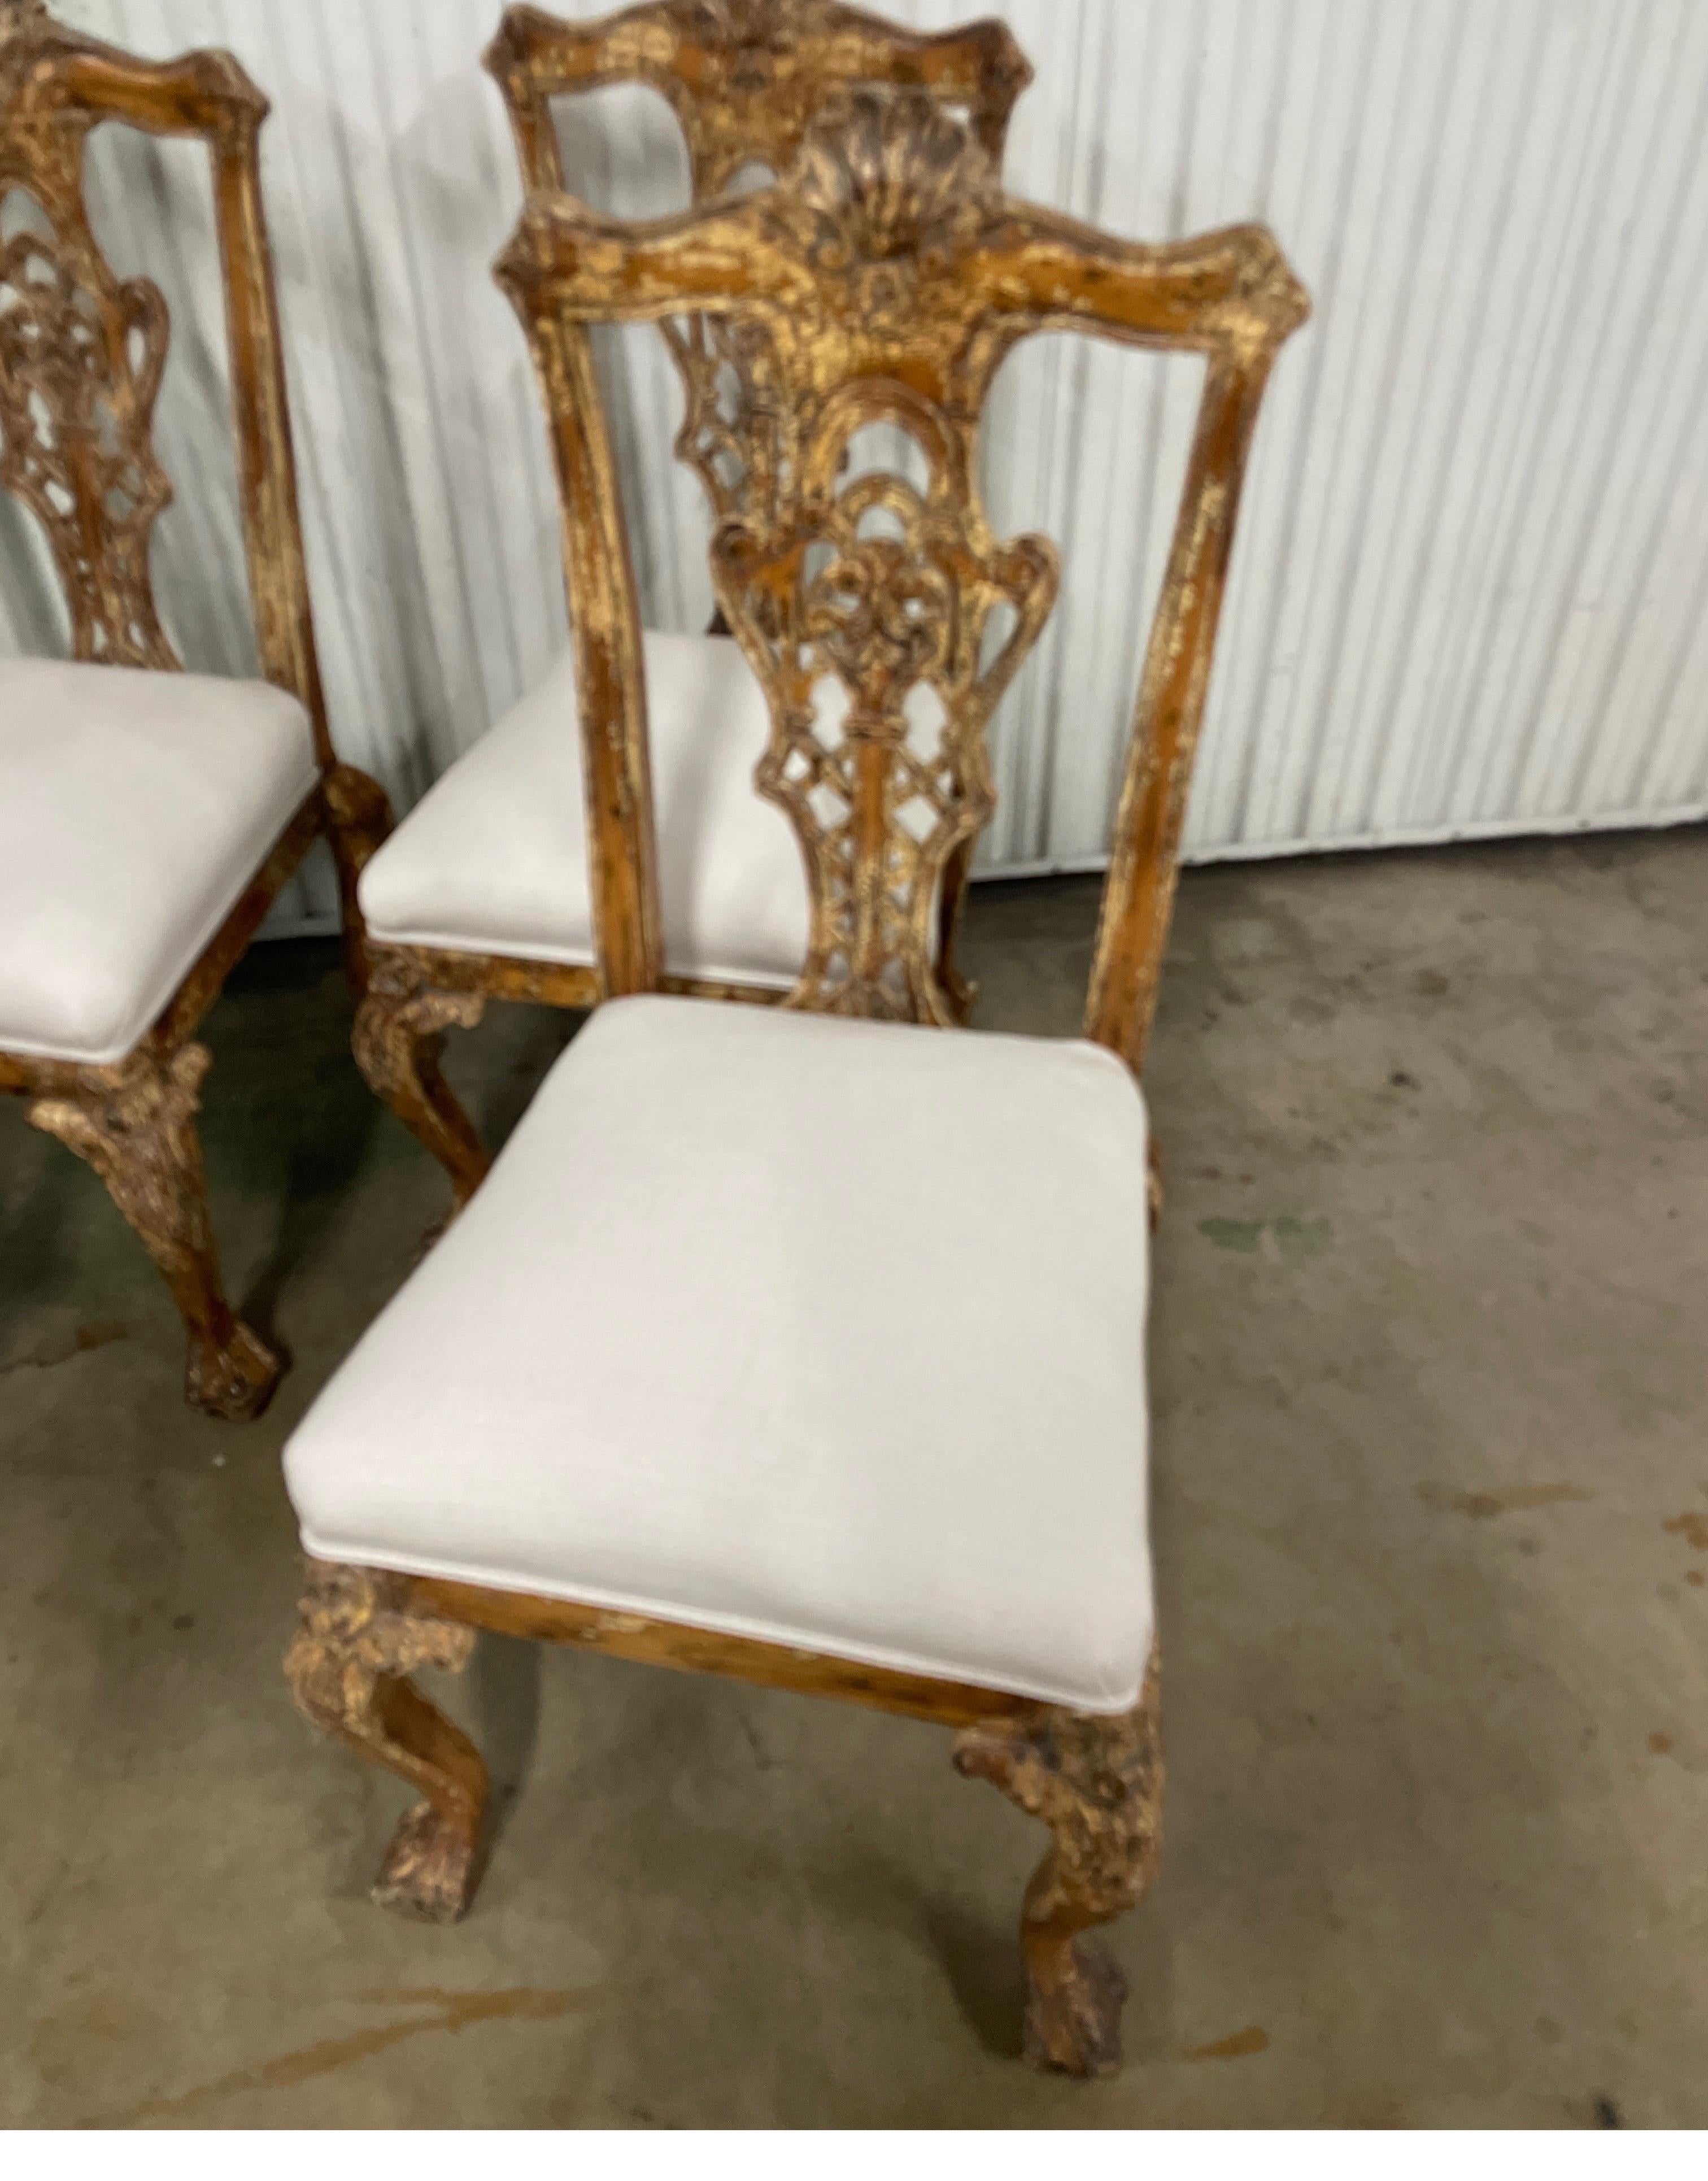 Beautiful set of four Chippendale style side chairs with a chippy painted finish. The chairs are nicely carved with a ball and claw foot. The back has a carved shell at top. Newly upholstered linen seat cushions.